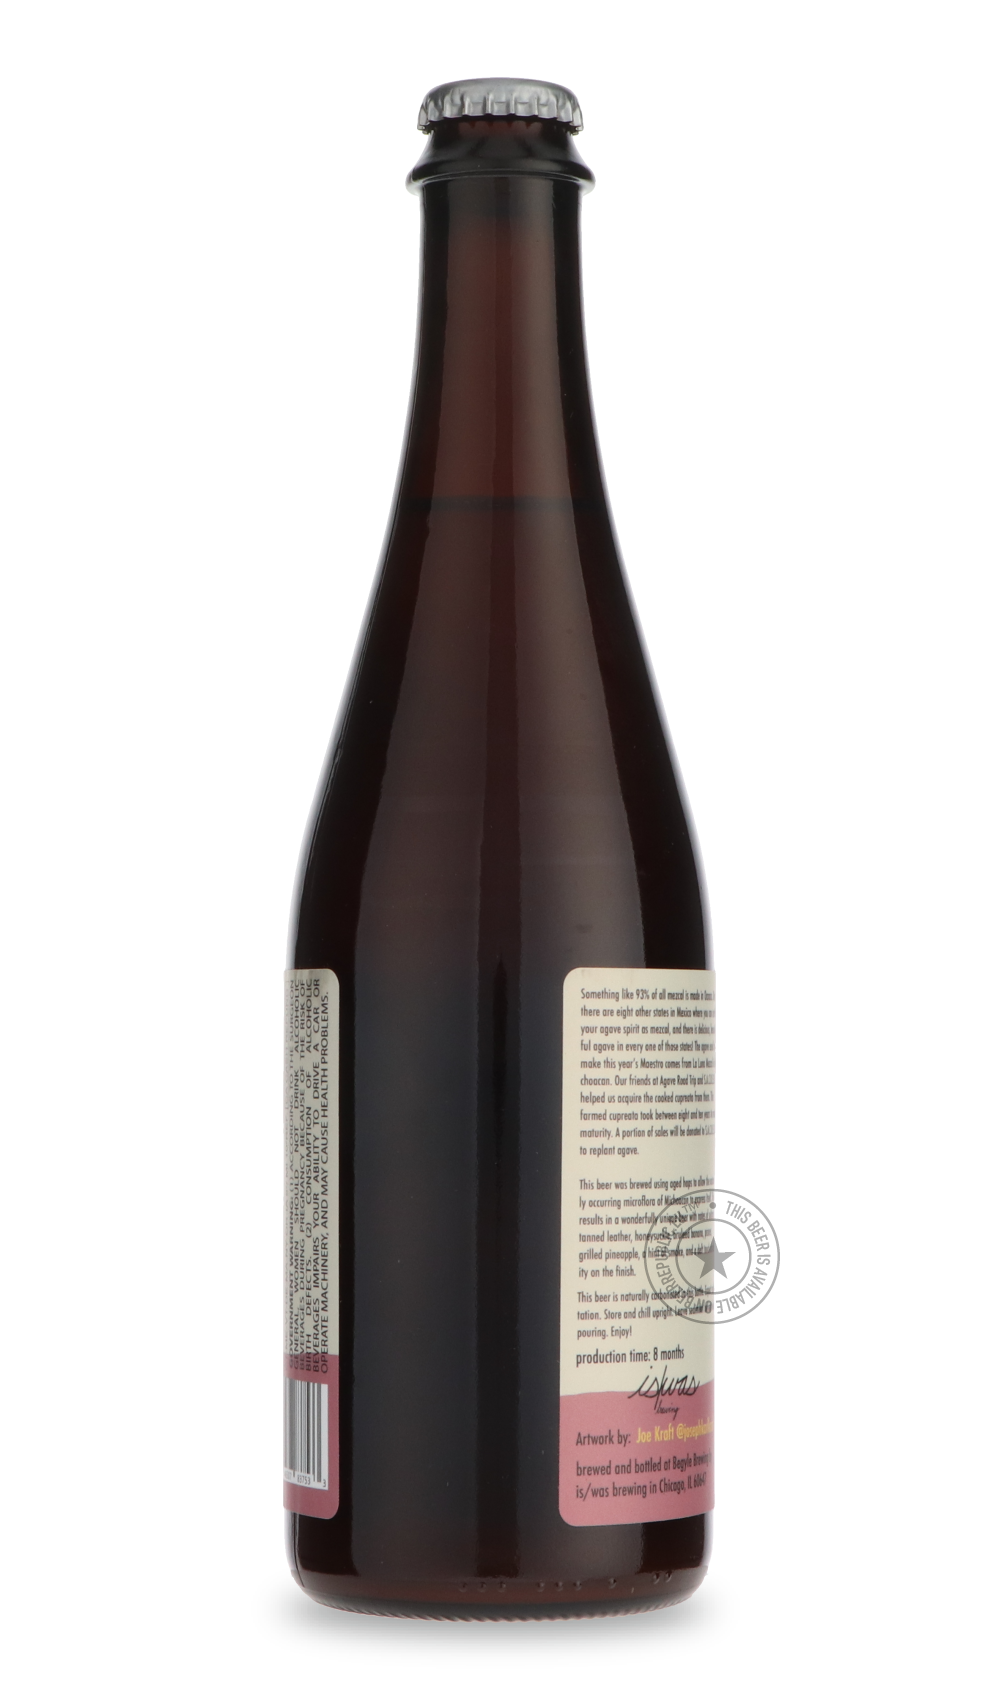 -is/was- Maestro 2021-Sour / Wild & Fruity- Only @ Beer Republic - The best online beer store for American & Canadian craft beer - Buy beer online from the USA and Canada - Bier online kopen - Amerikaans bier kopen - Craft beer store - Craft beer kopen - Amerikanisch bier kaufen - Bier online kaufen - Acheter biere online - IPA - Stout - Porter - New England IPA - Hazy IPA - Imperial Stout - Barrel Aged - Barrel Aged Imperial Stout - Brown - Dark beer - Blond - Blonde - Pilsner - Lager - Wheat - Weizen - Am